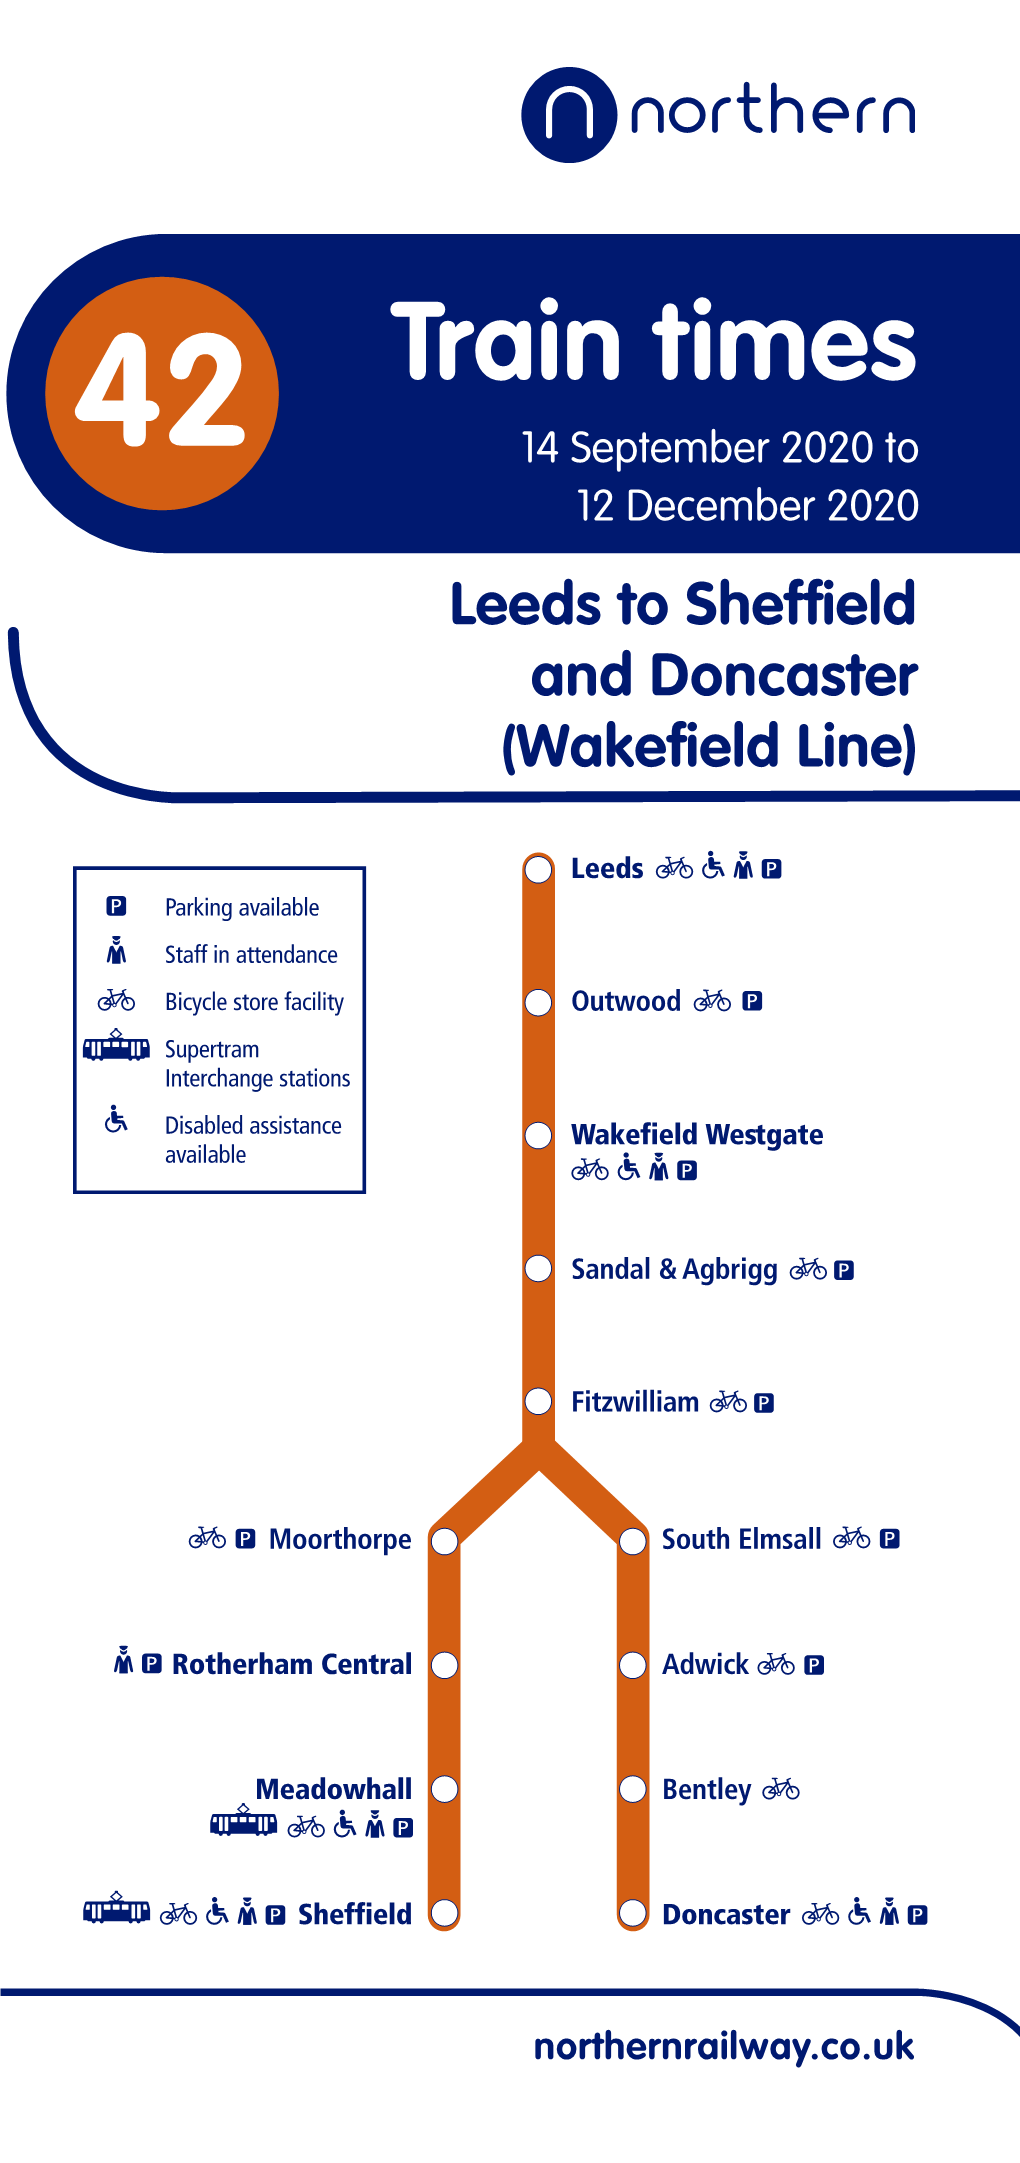 42 Train Times Leeds to Sheffield and Doncaster (Wakefield Line)